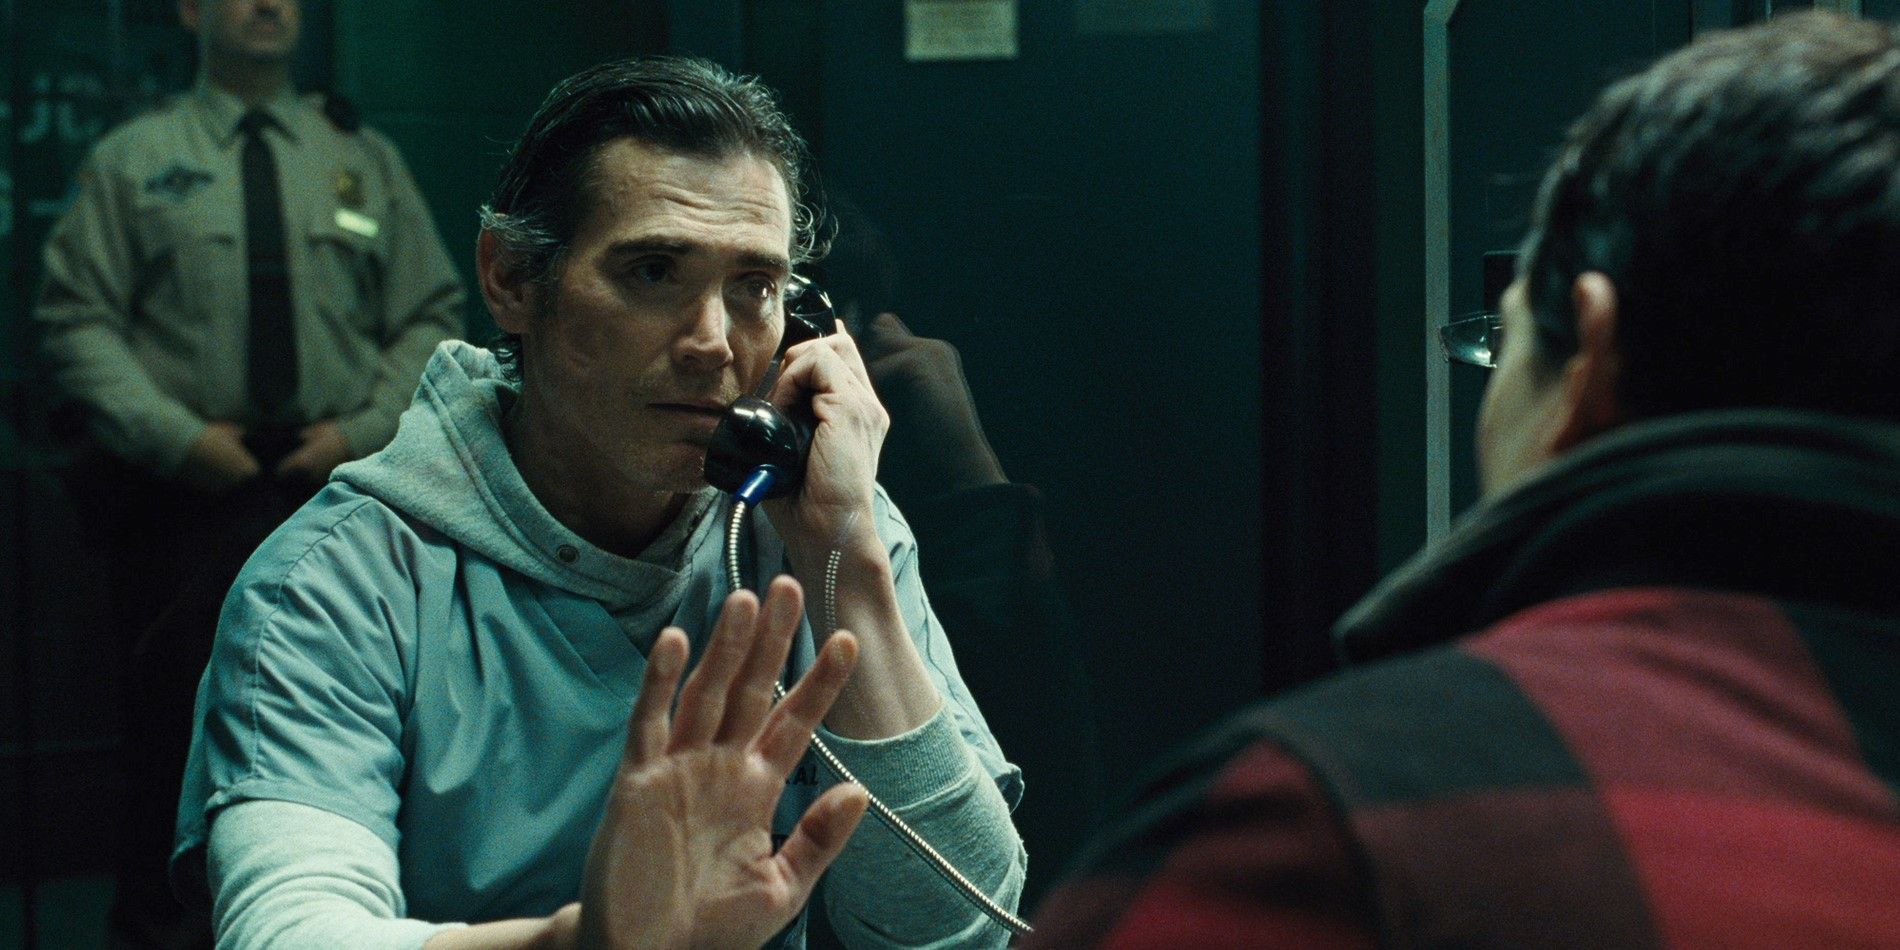 Barry visits his father (Billy Crudup) in prison